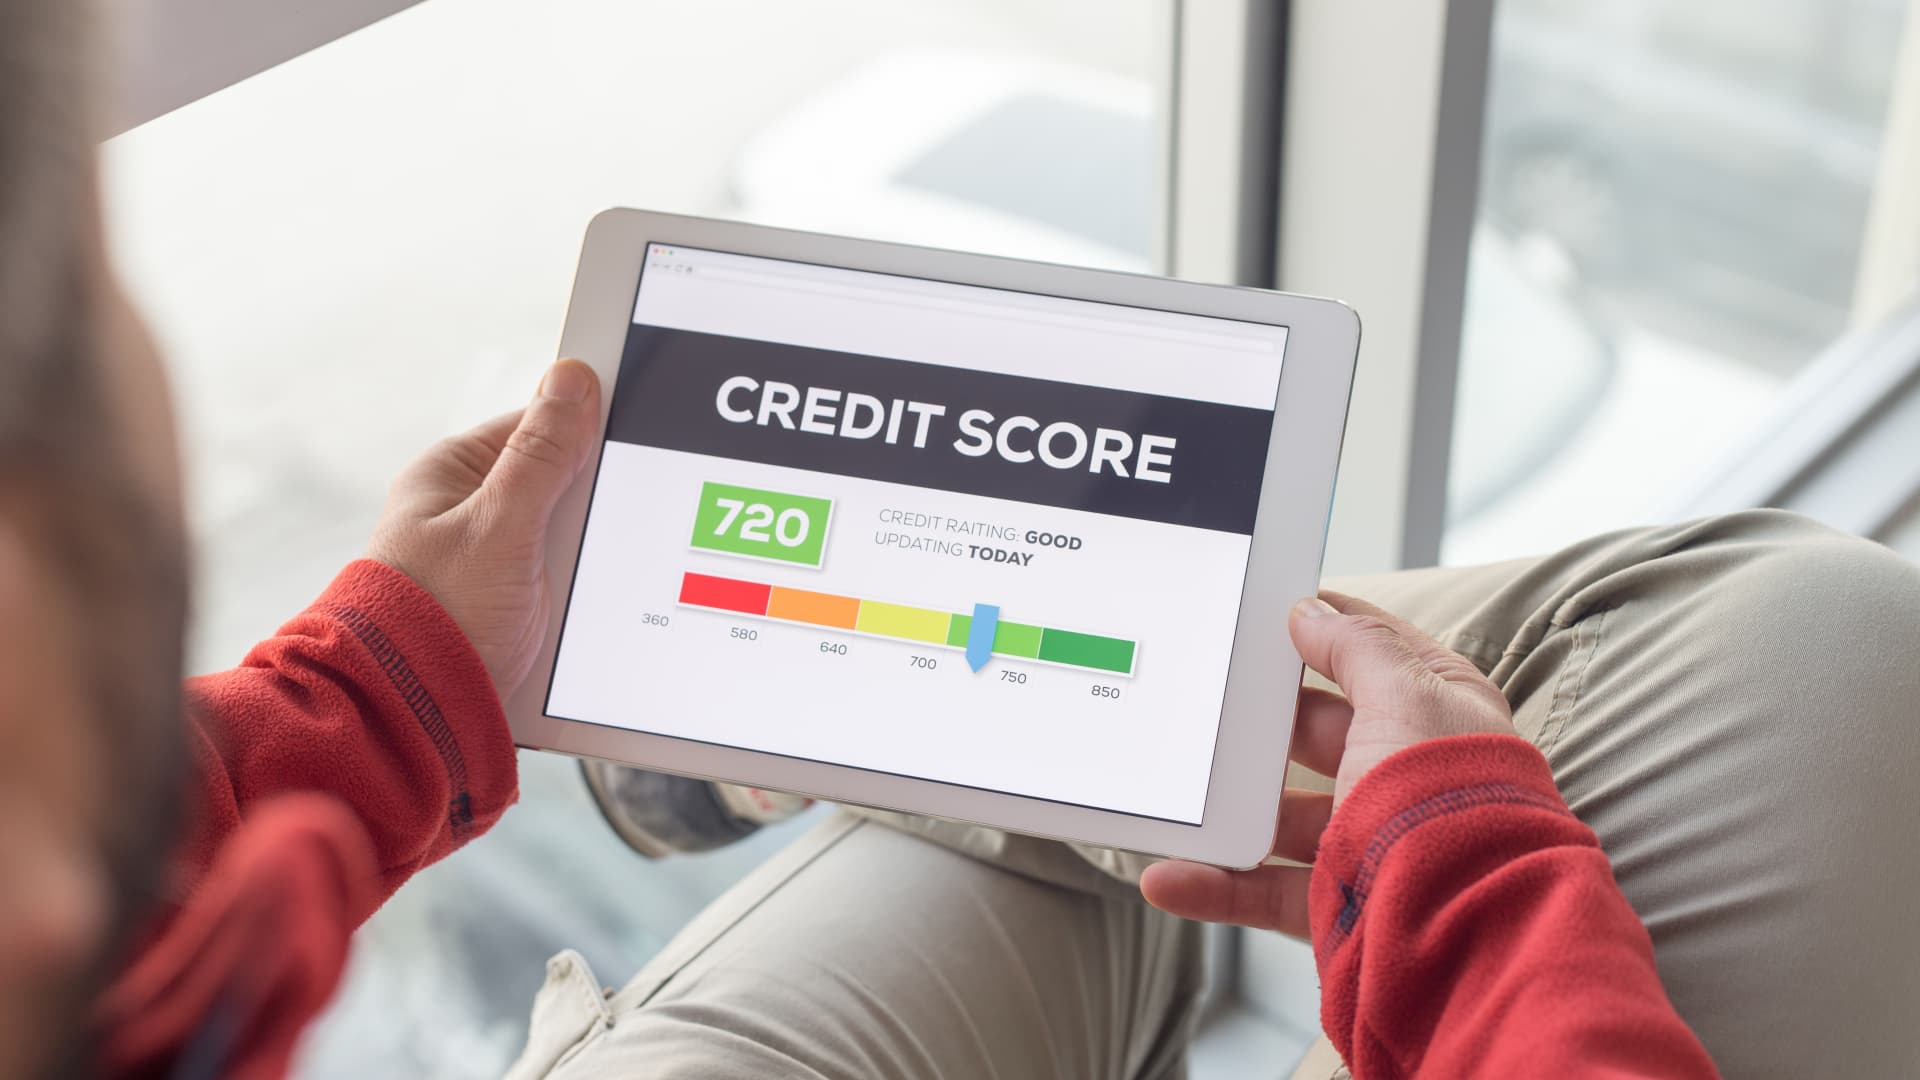 4 Personal Loans To Apply To If Your Credit Score Is 740 Or Lower